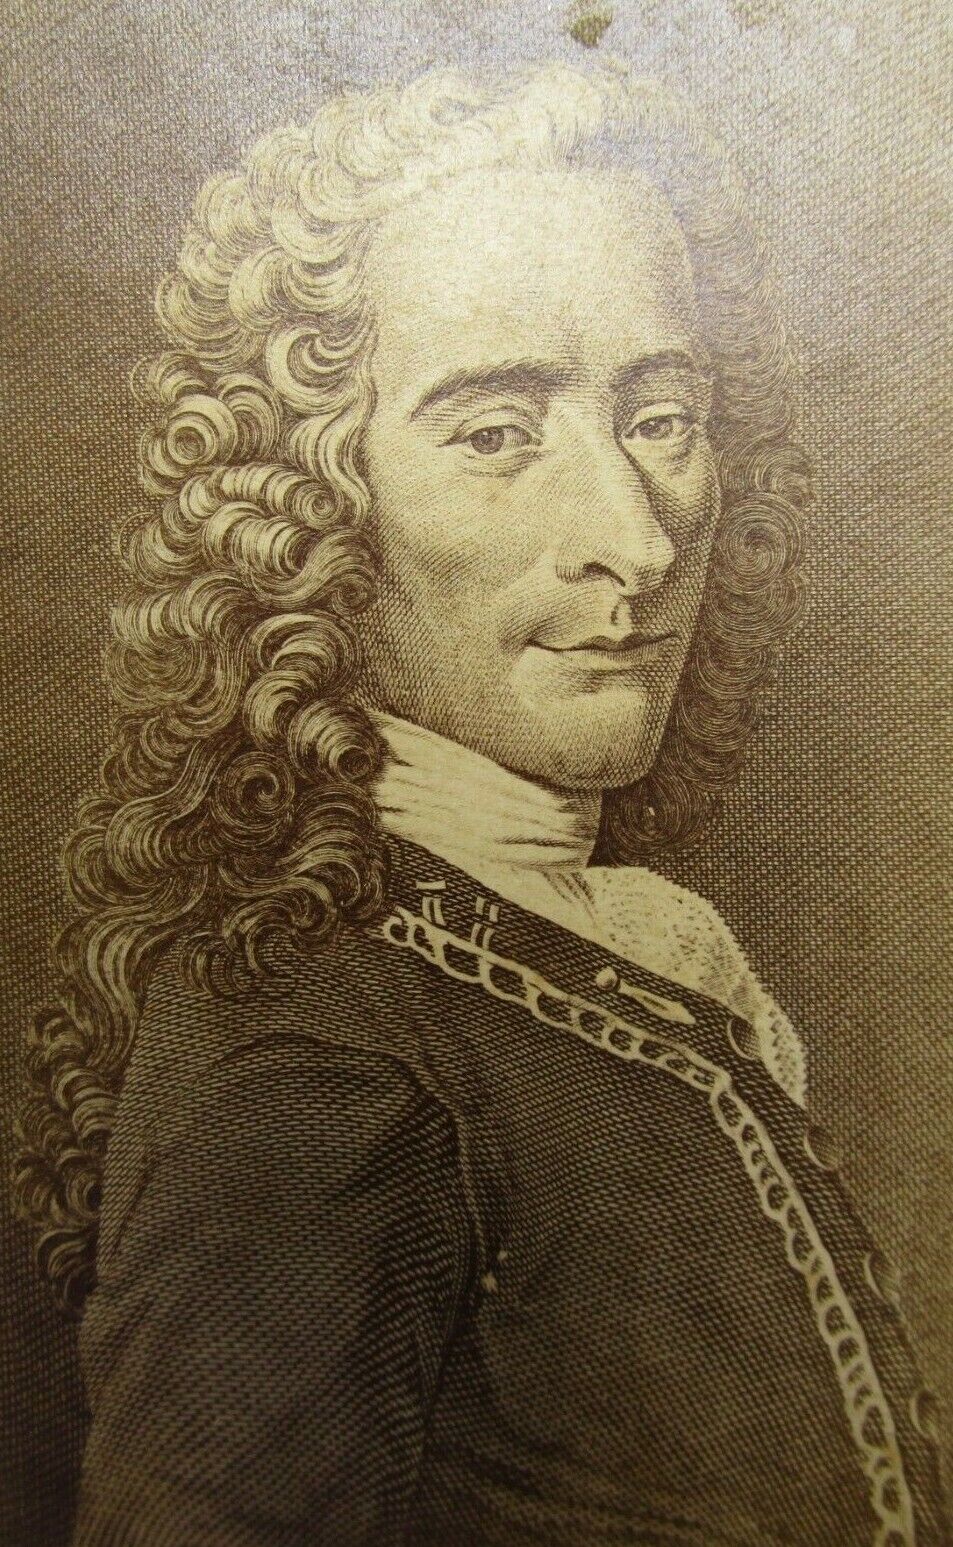 Antique CDV Illustration of French Writer, Philosopher Voltaire